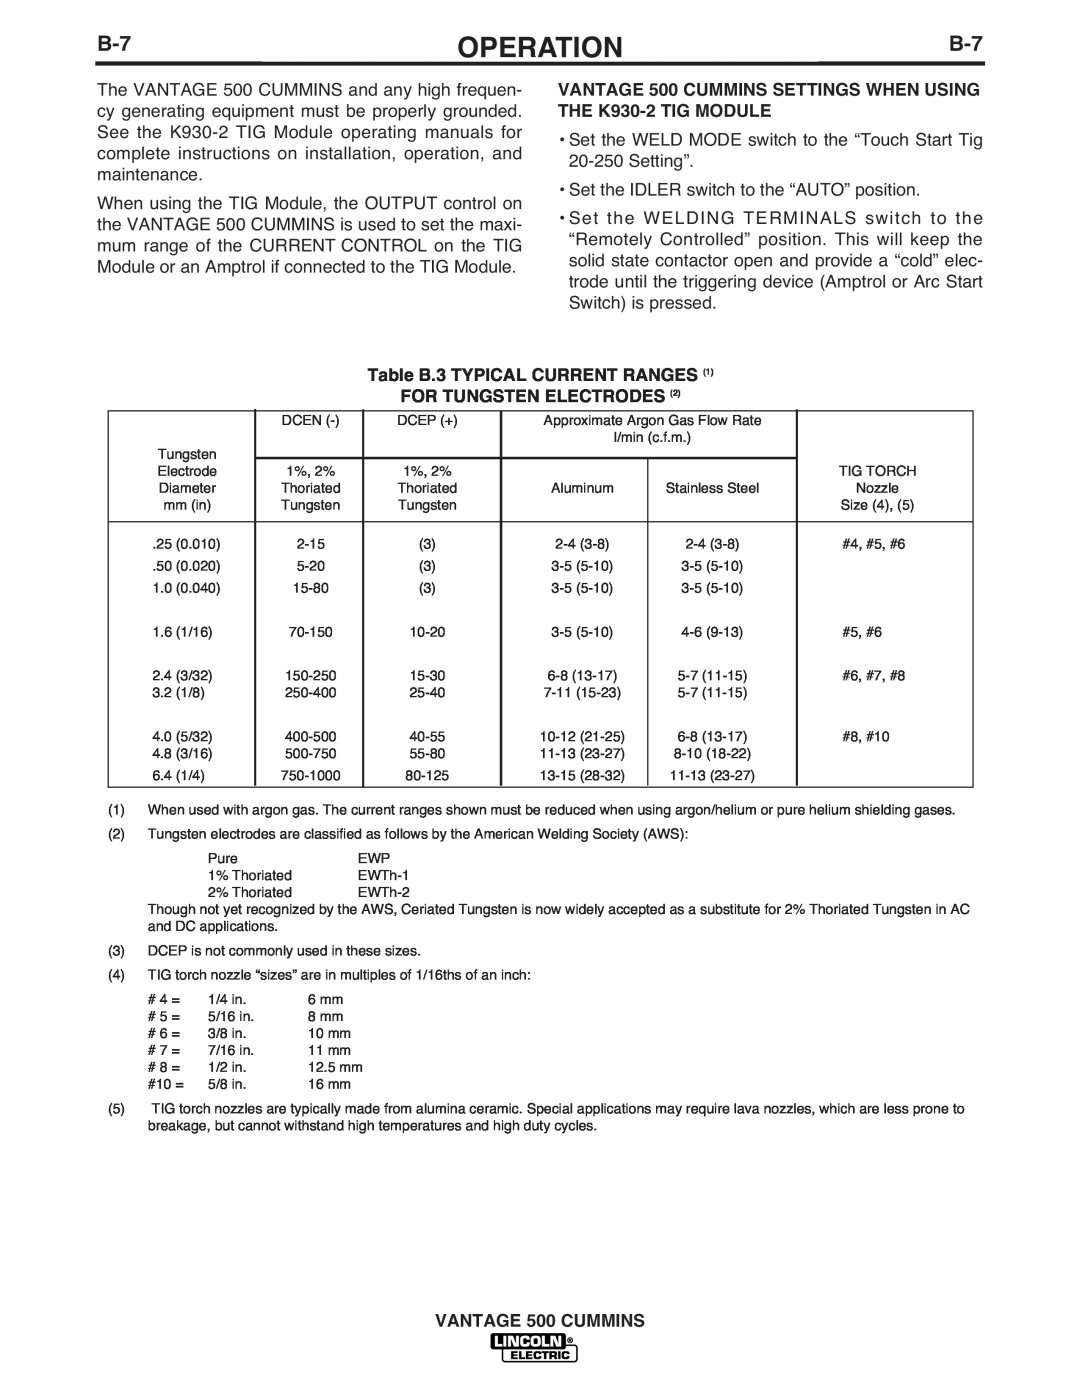 Lincoln Electric manual Operation, Table B.3 TYPICAL CURRENT RANGES, For Tungsten Electrodes, VANTAGE 500 CUMMINS 